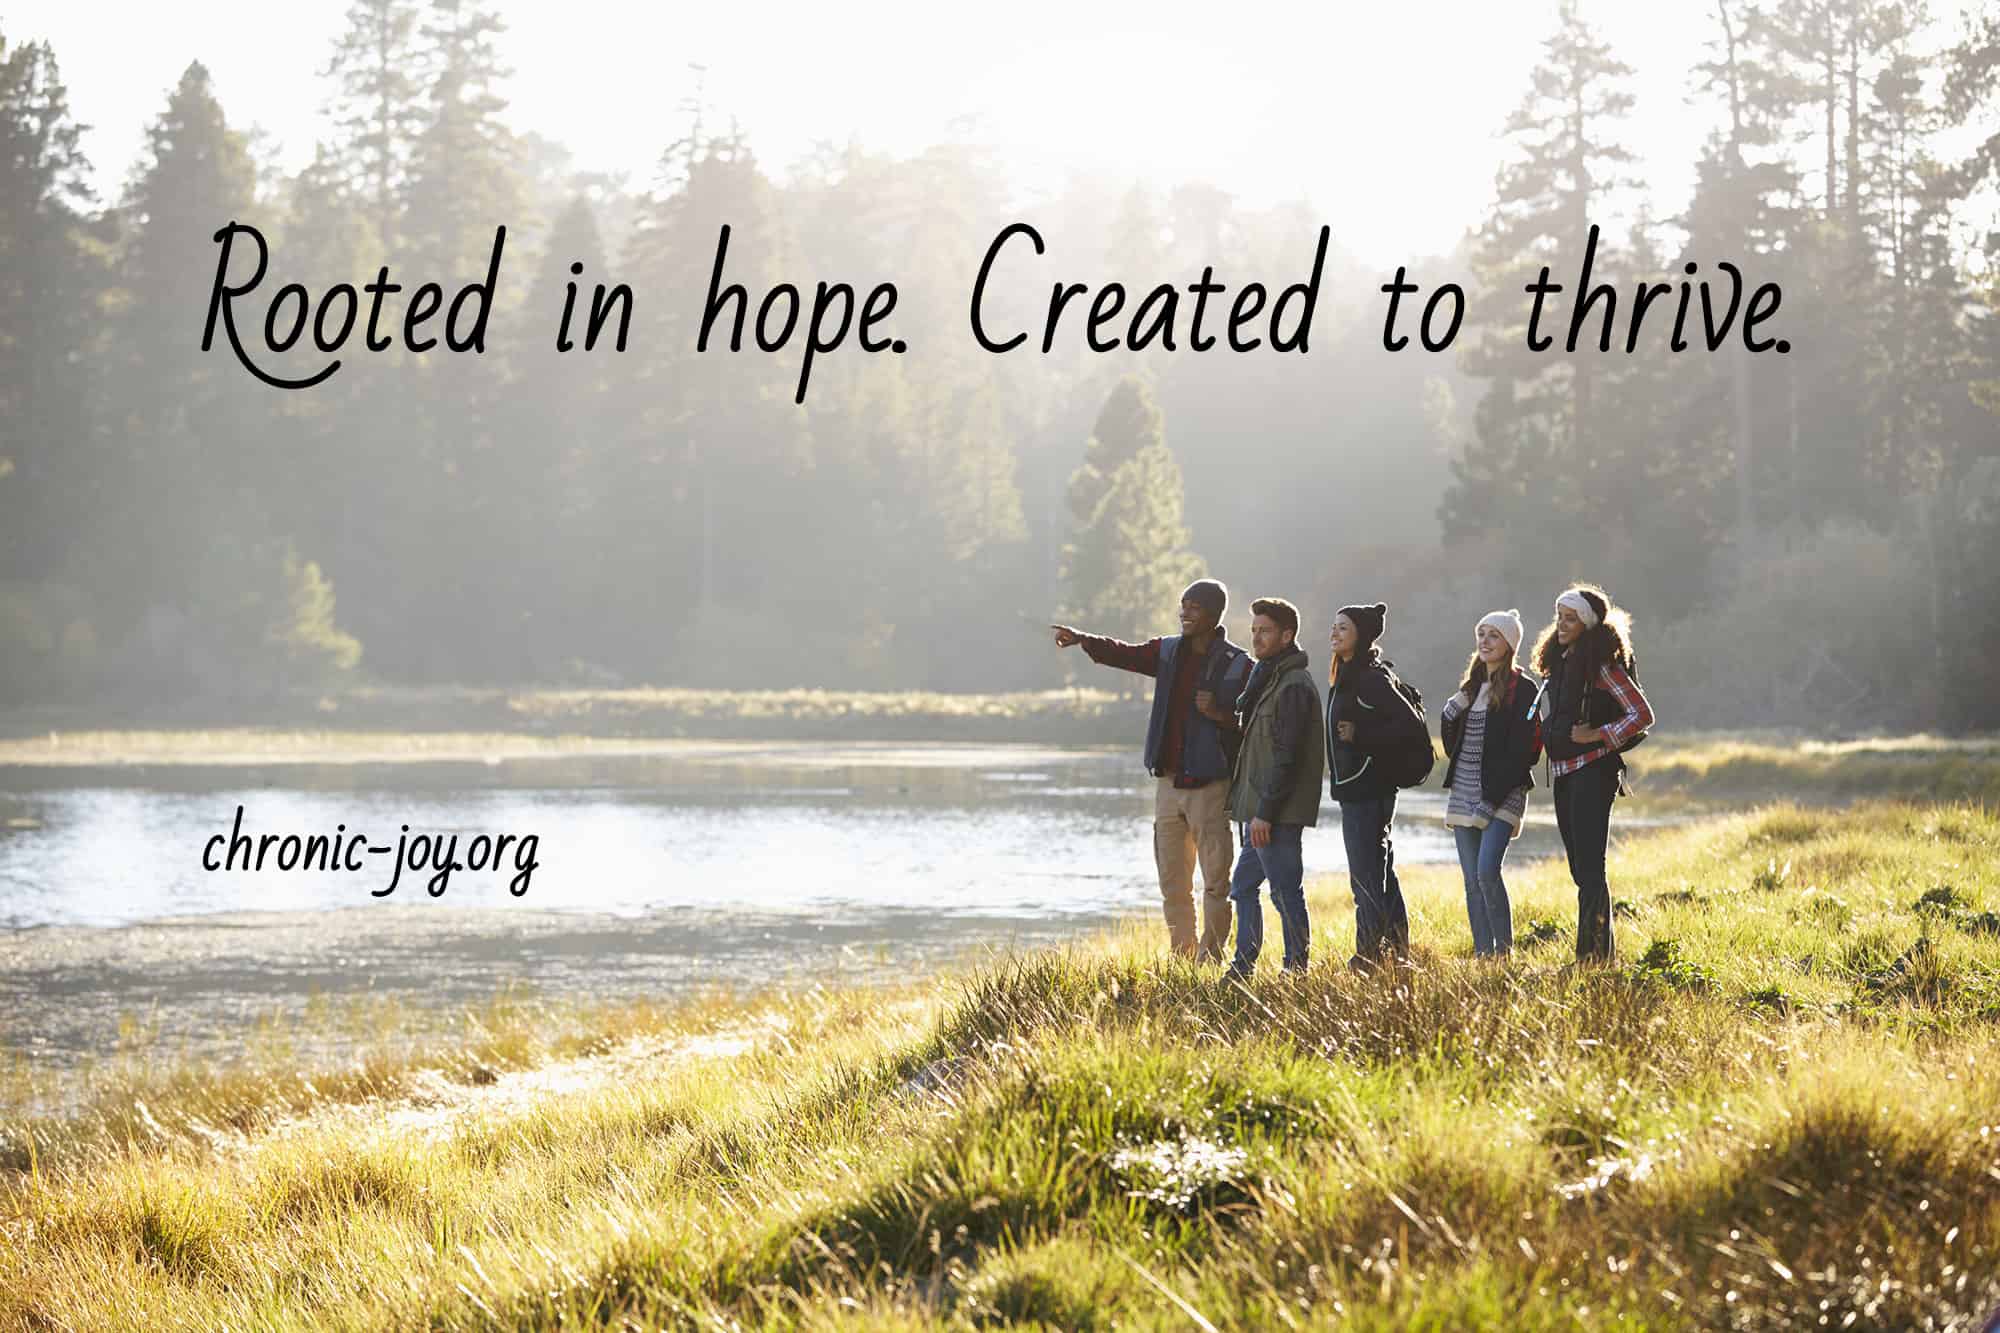 Young Adults and Chronic Illness: Rooted in hope. Created to thrive.